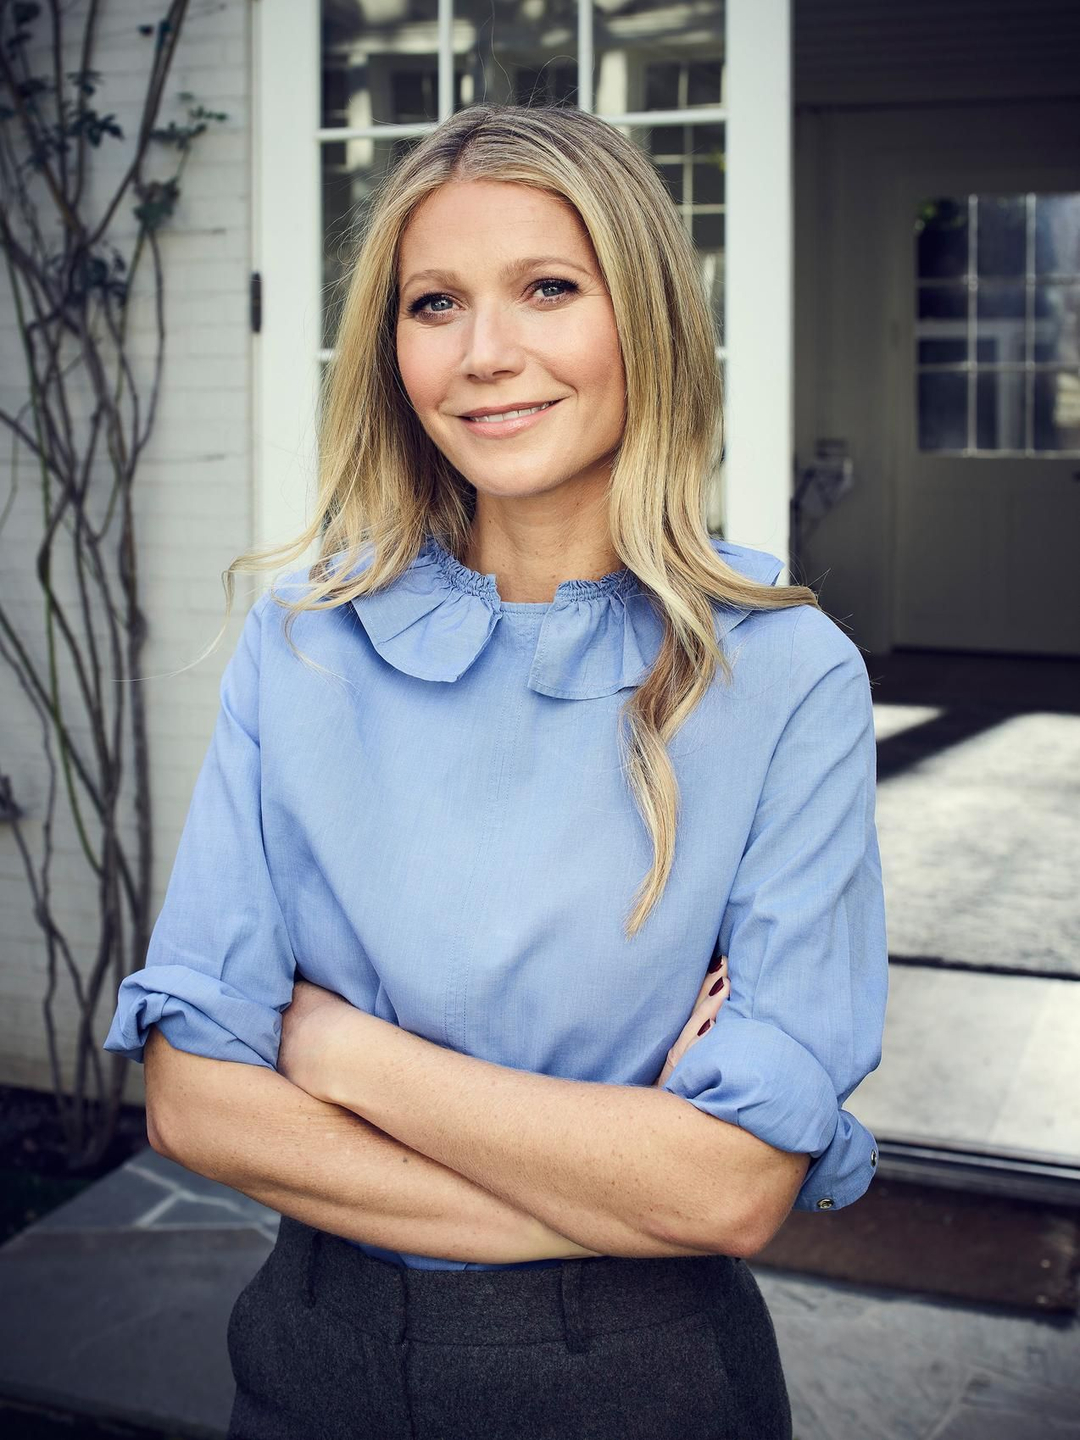 Gwyneth Paltrow does she have kids